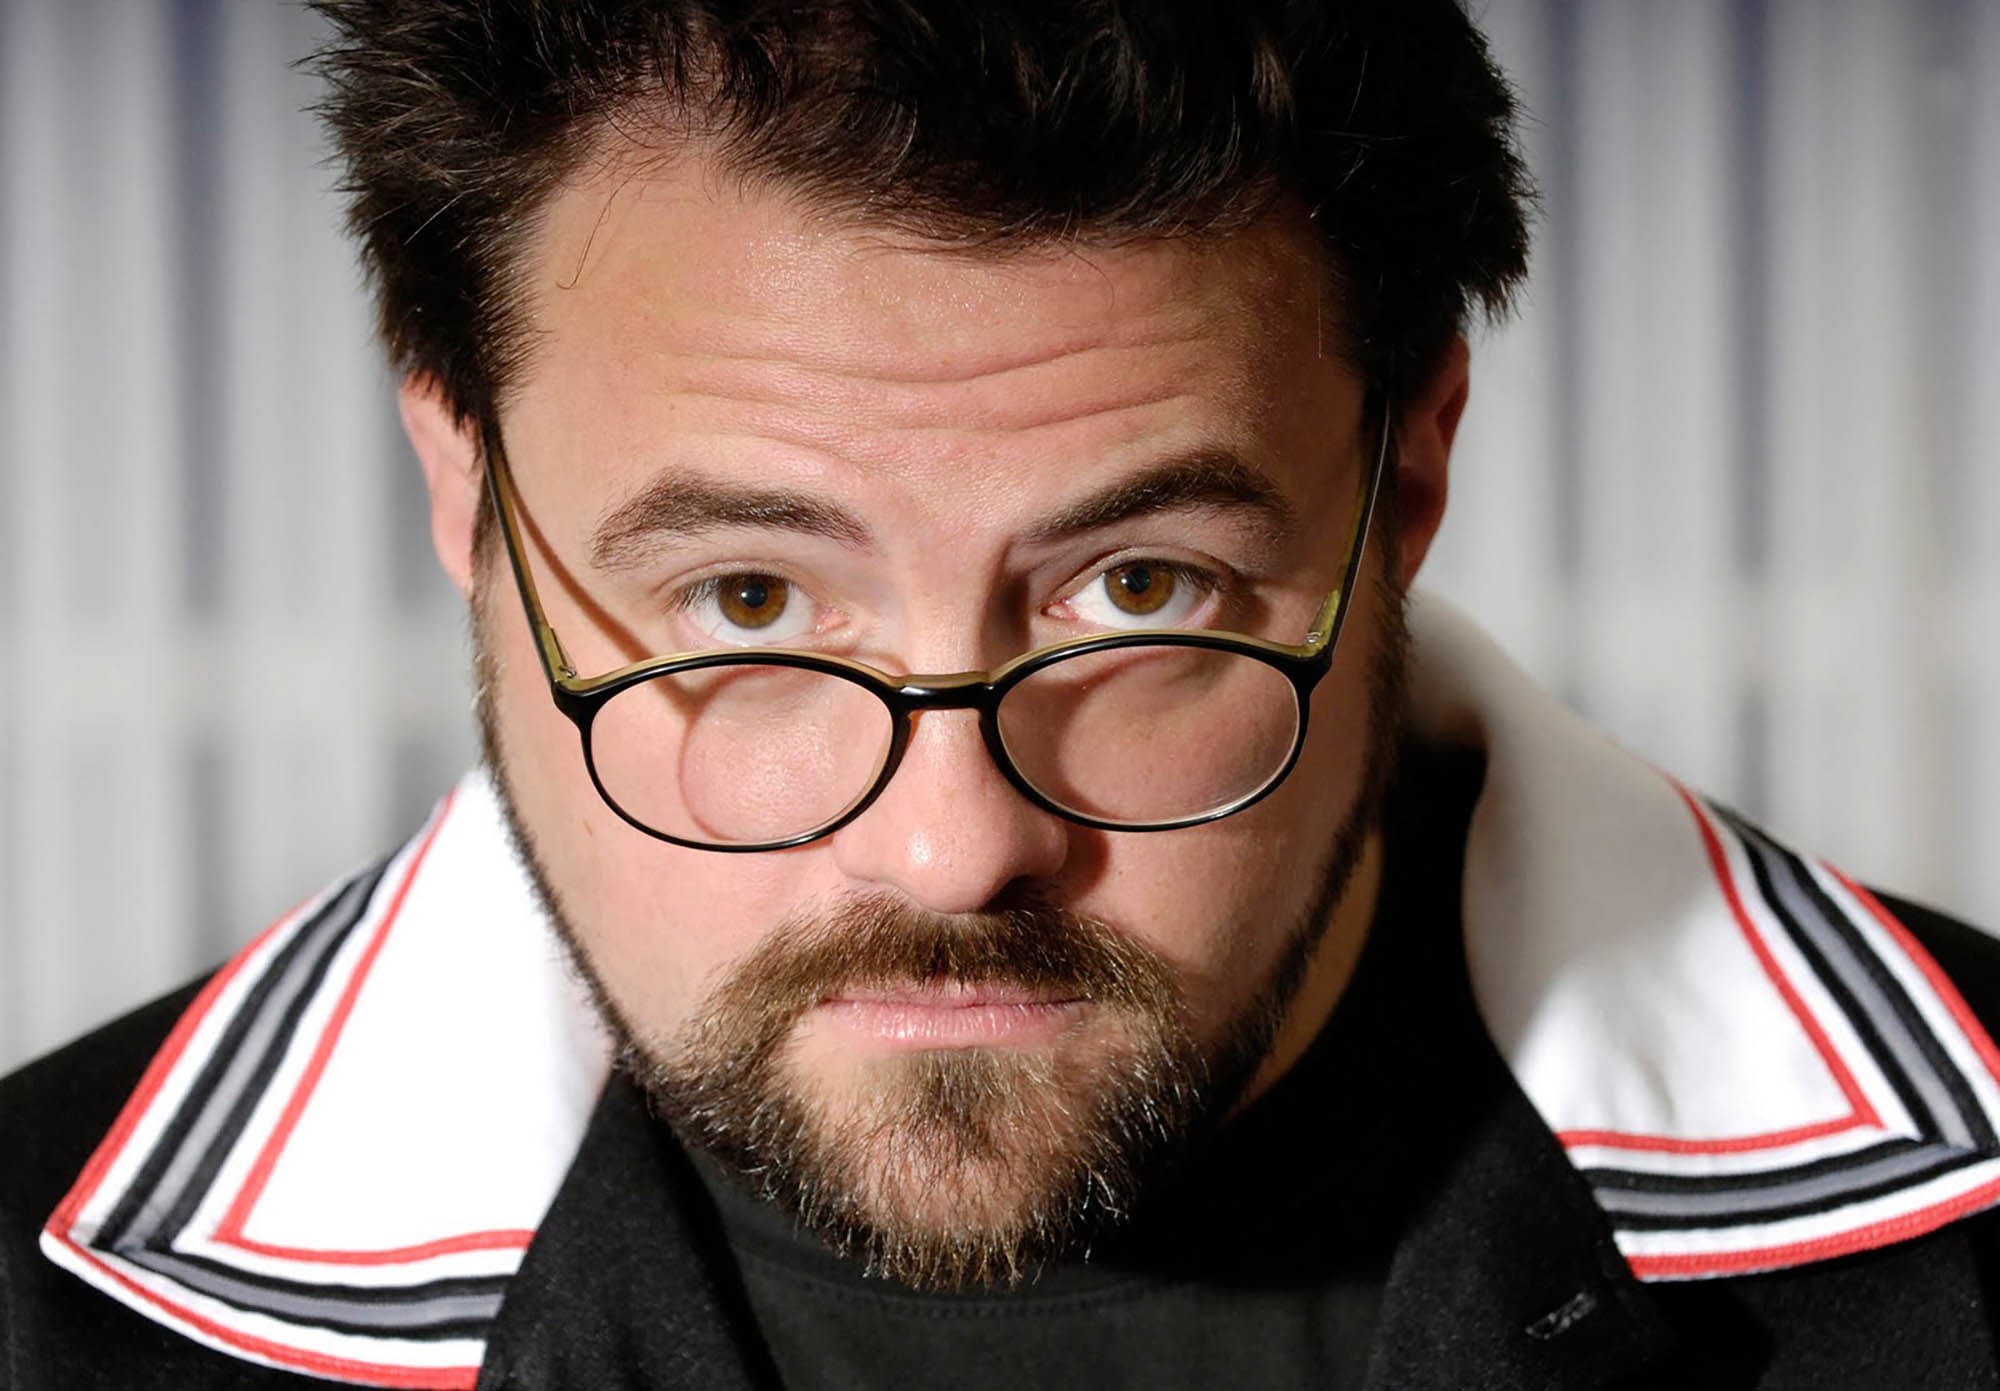 Kevin Smith is known for his comedies set within the “View Askewniverse”. A celebration of the best moments of his life’s work is in order.